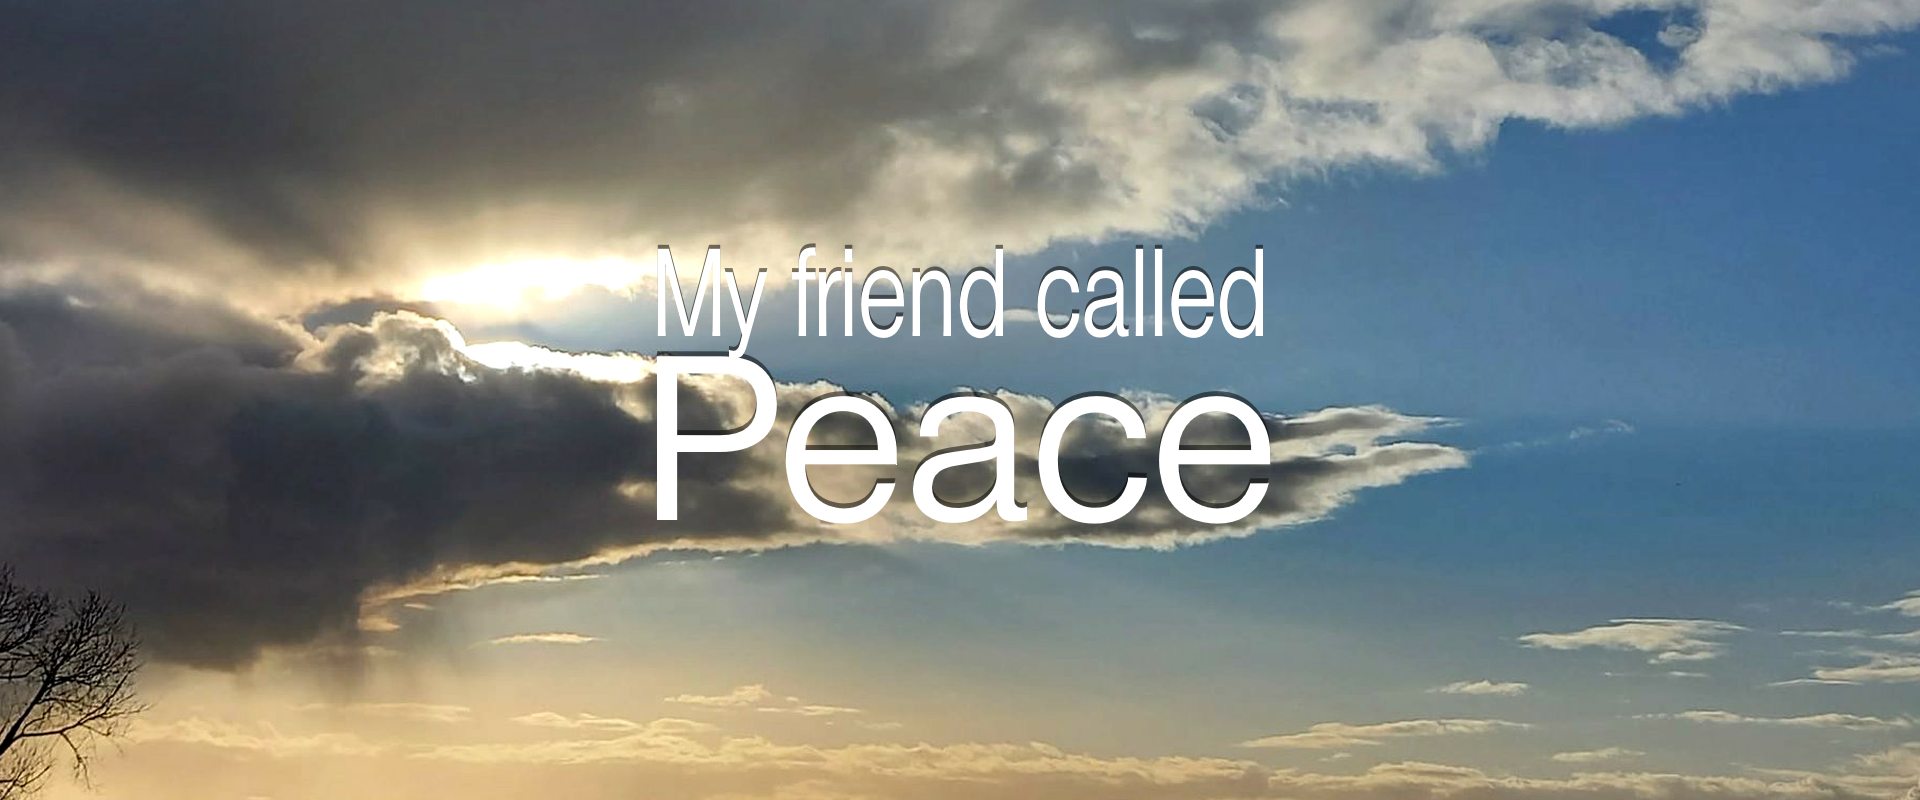 My friend called Peace